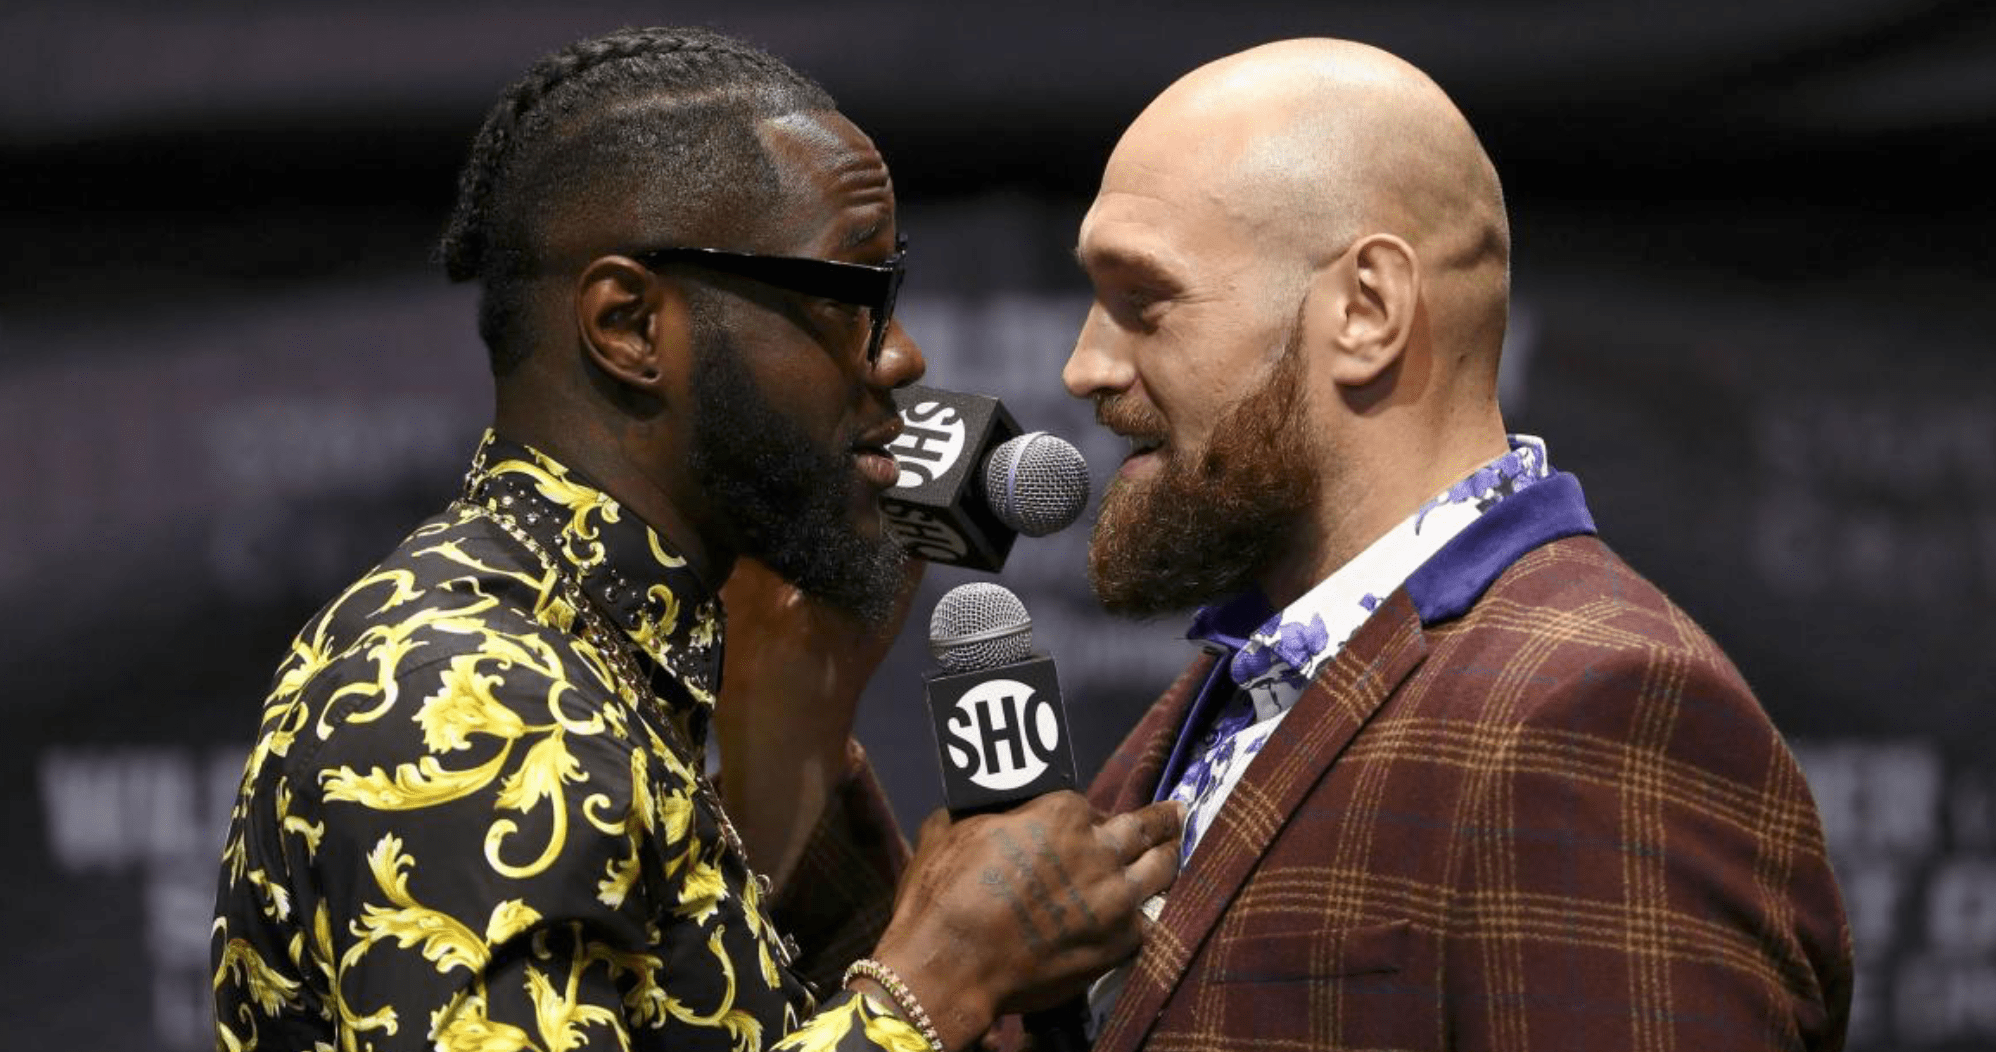 Tyson Fury: I Will Knockout Deontay Wilder In Two Rounds